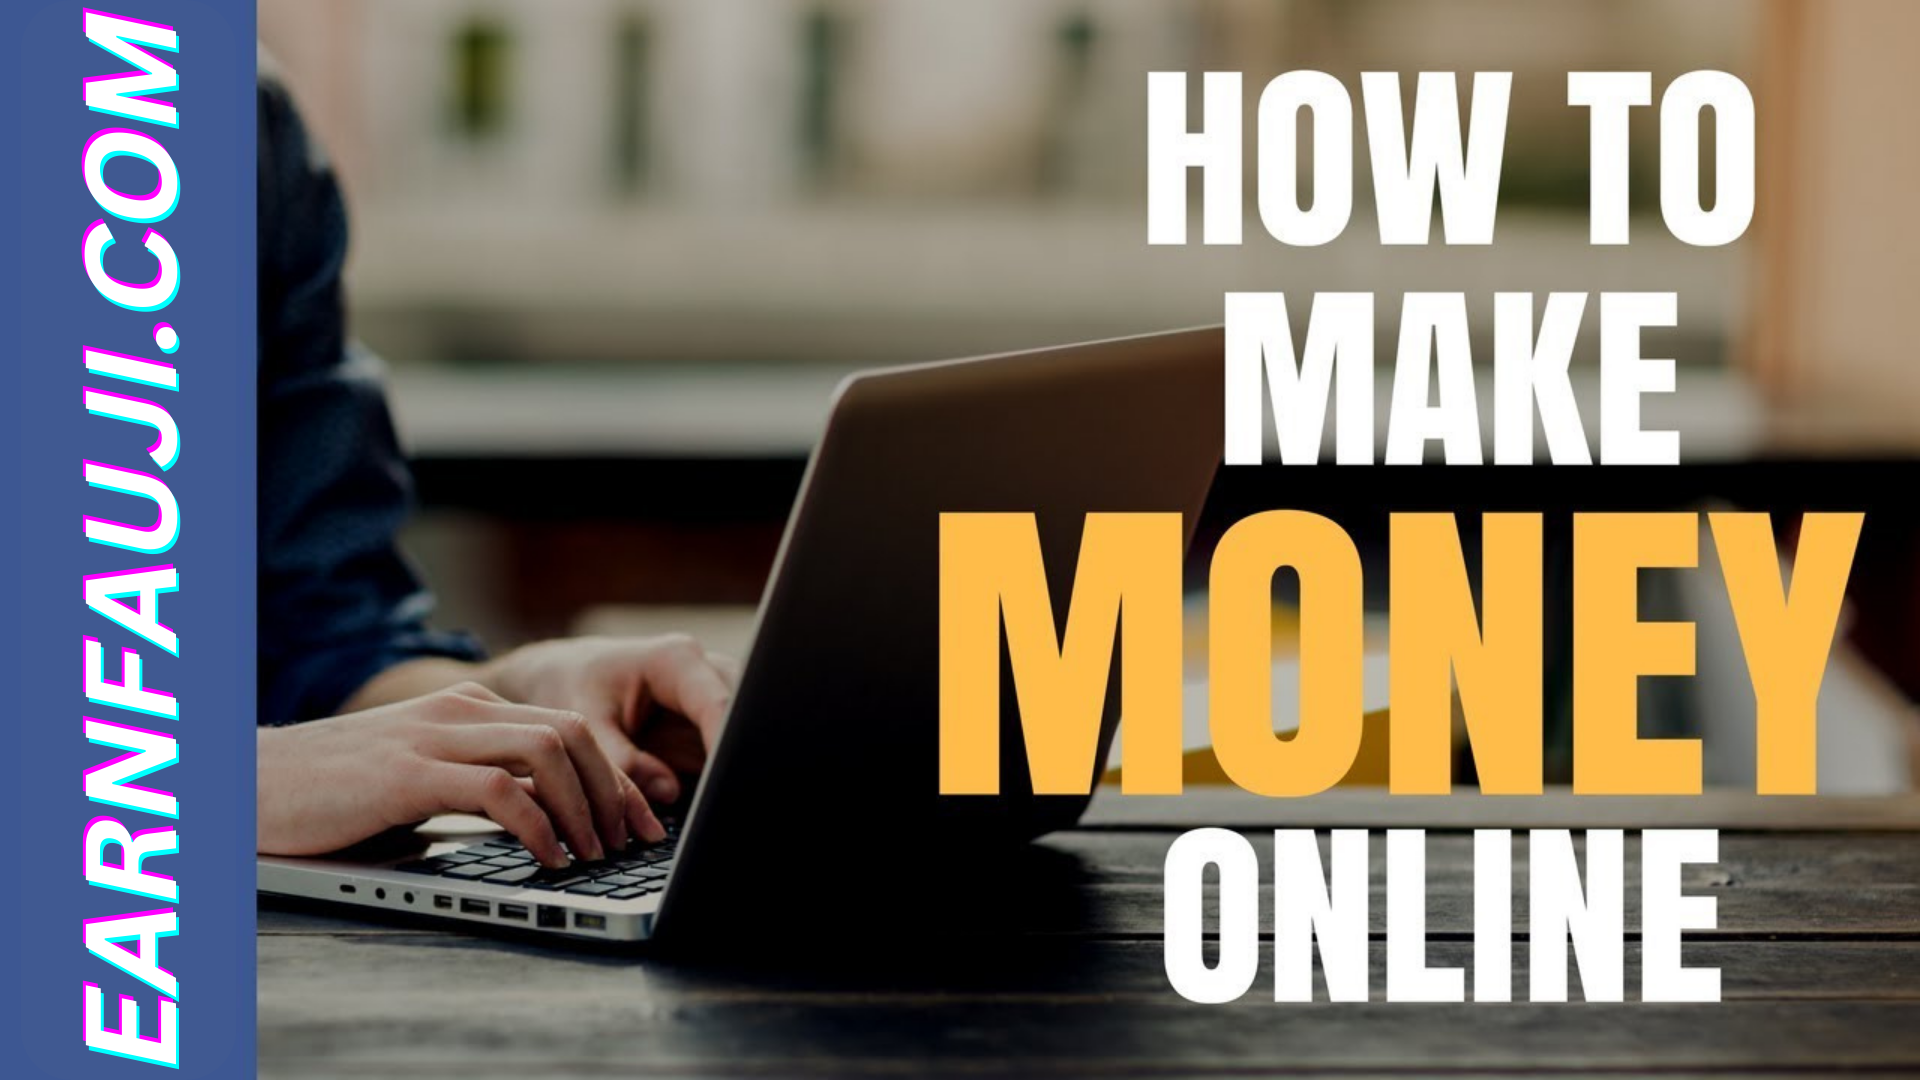 MONEY ONLINE WITHOUT INVESTING